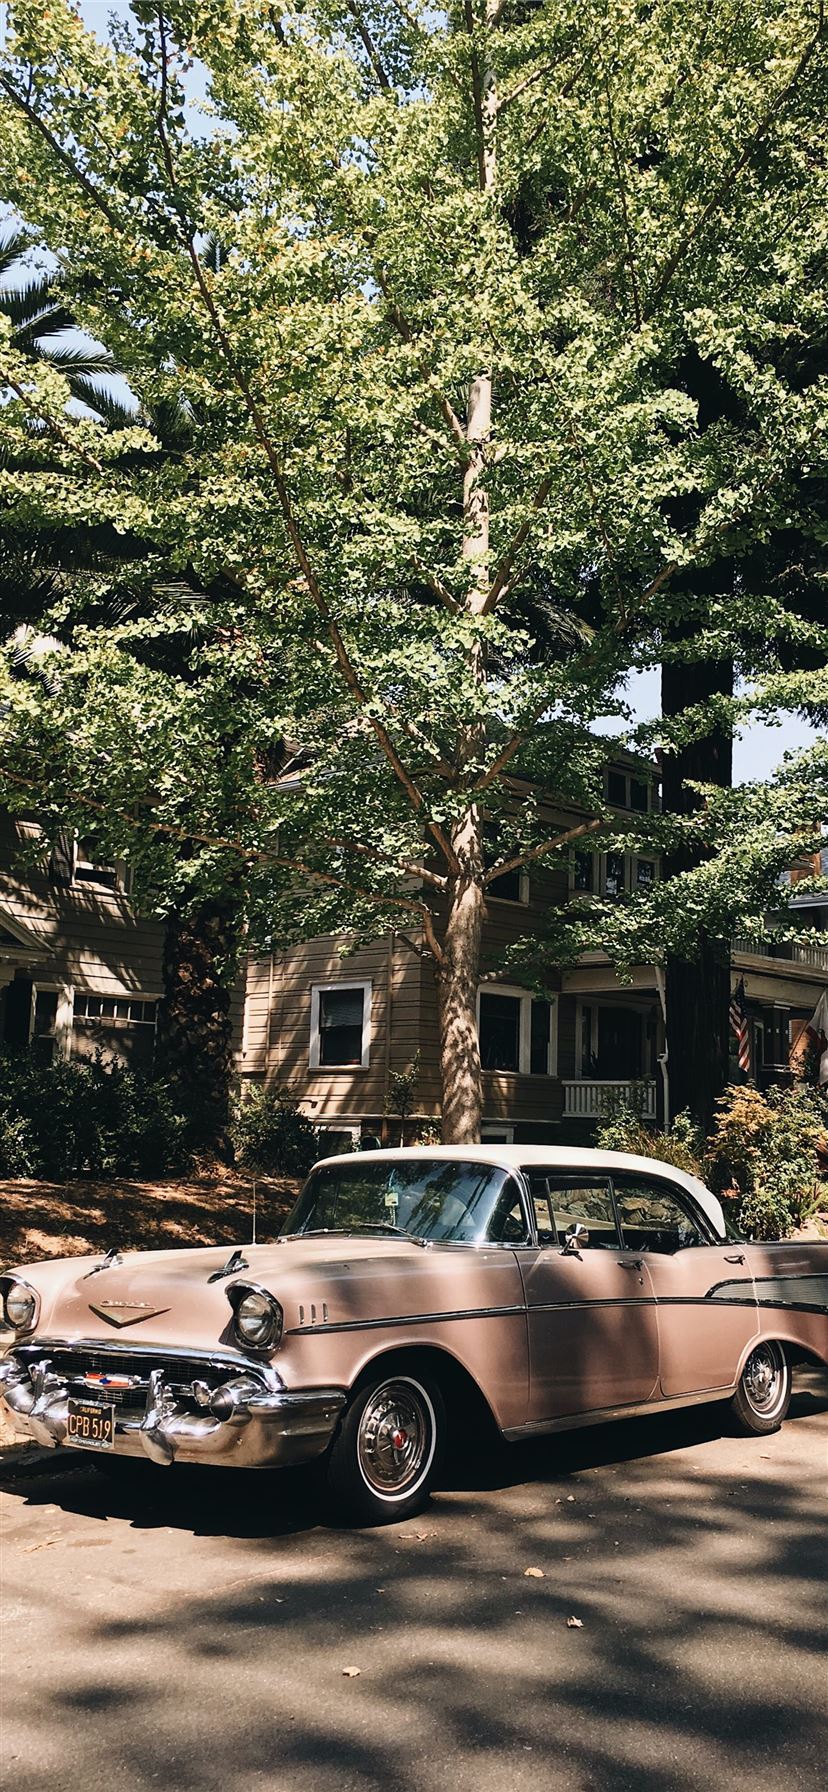 vintage pink sedan parked in front of tree iPhone 11 Wallpaper Free Download